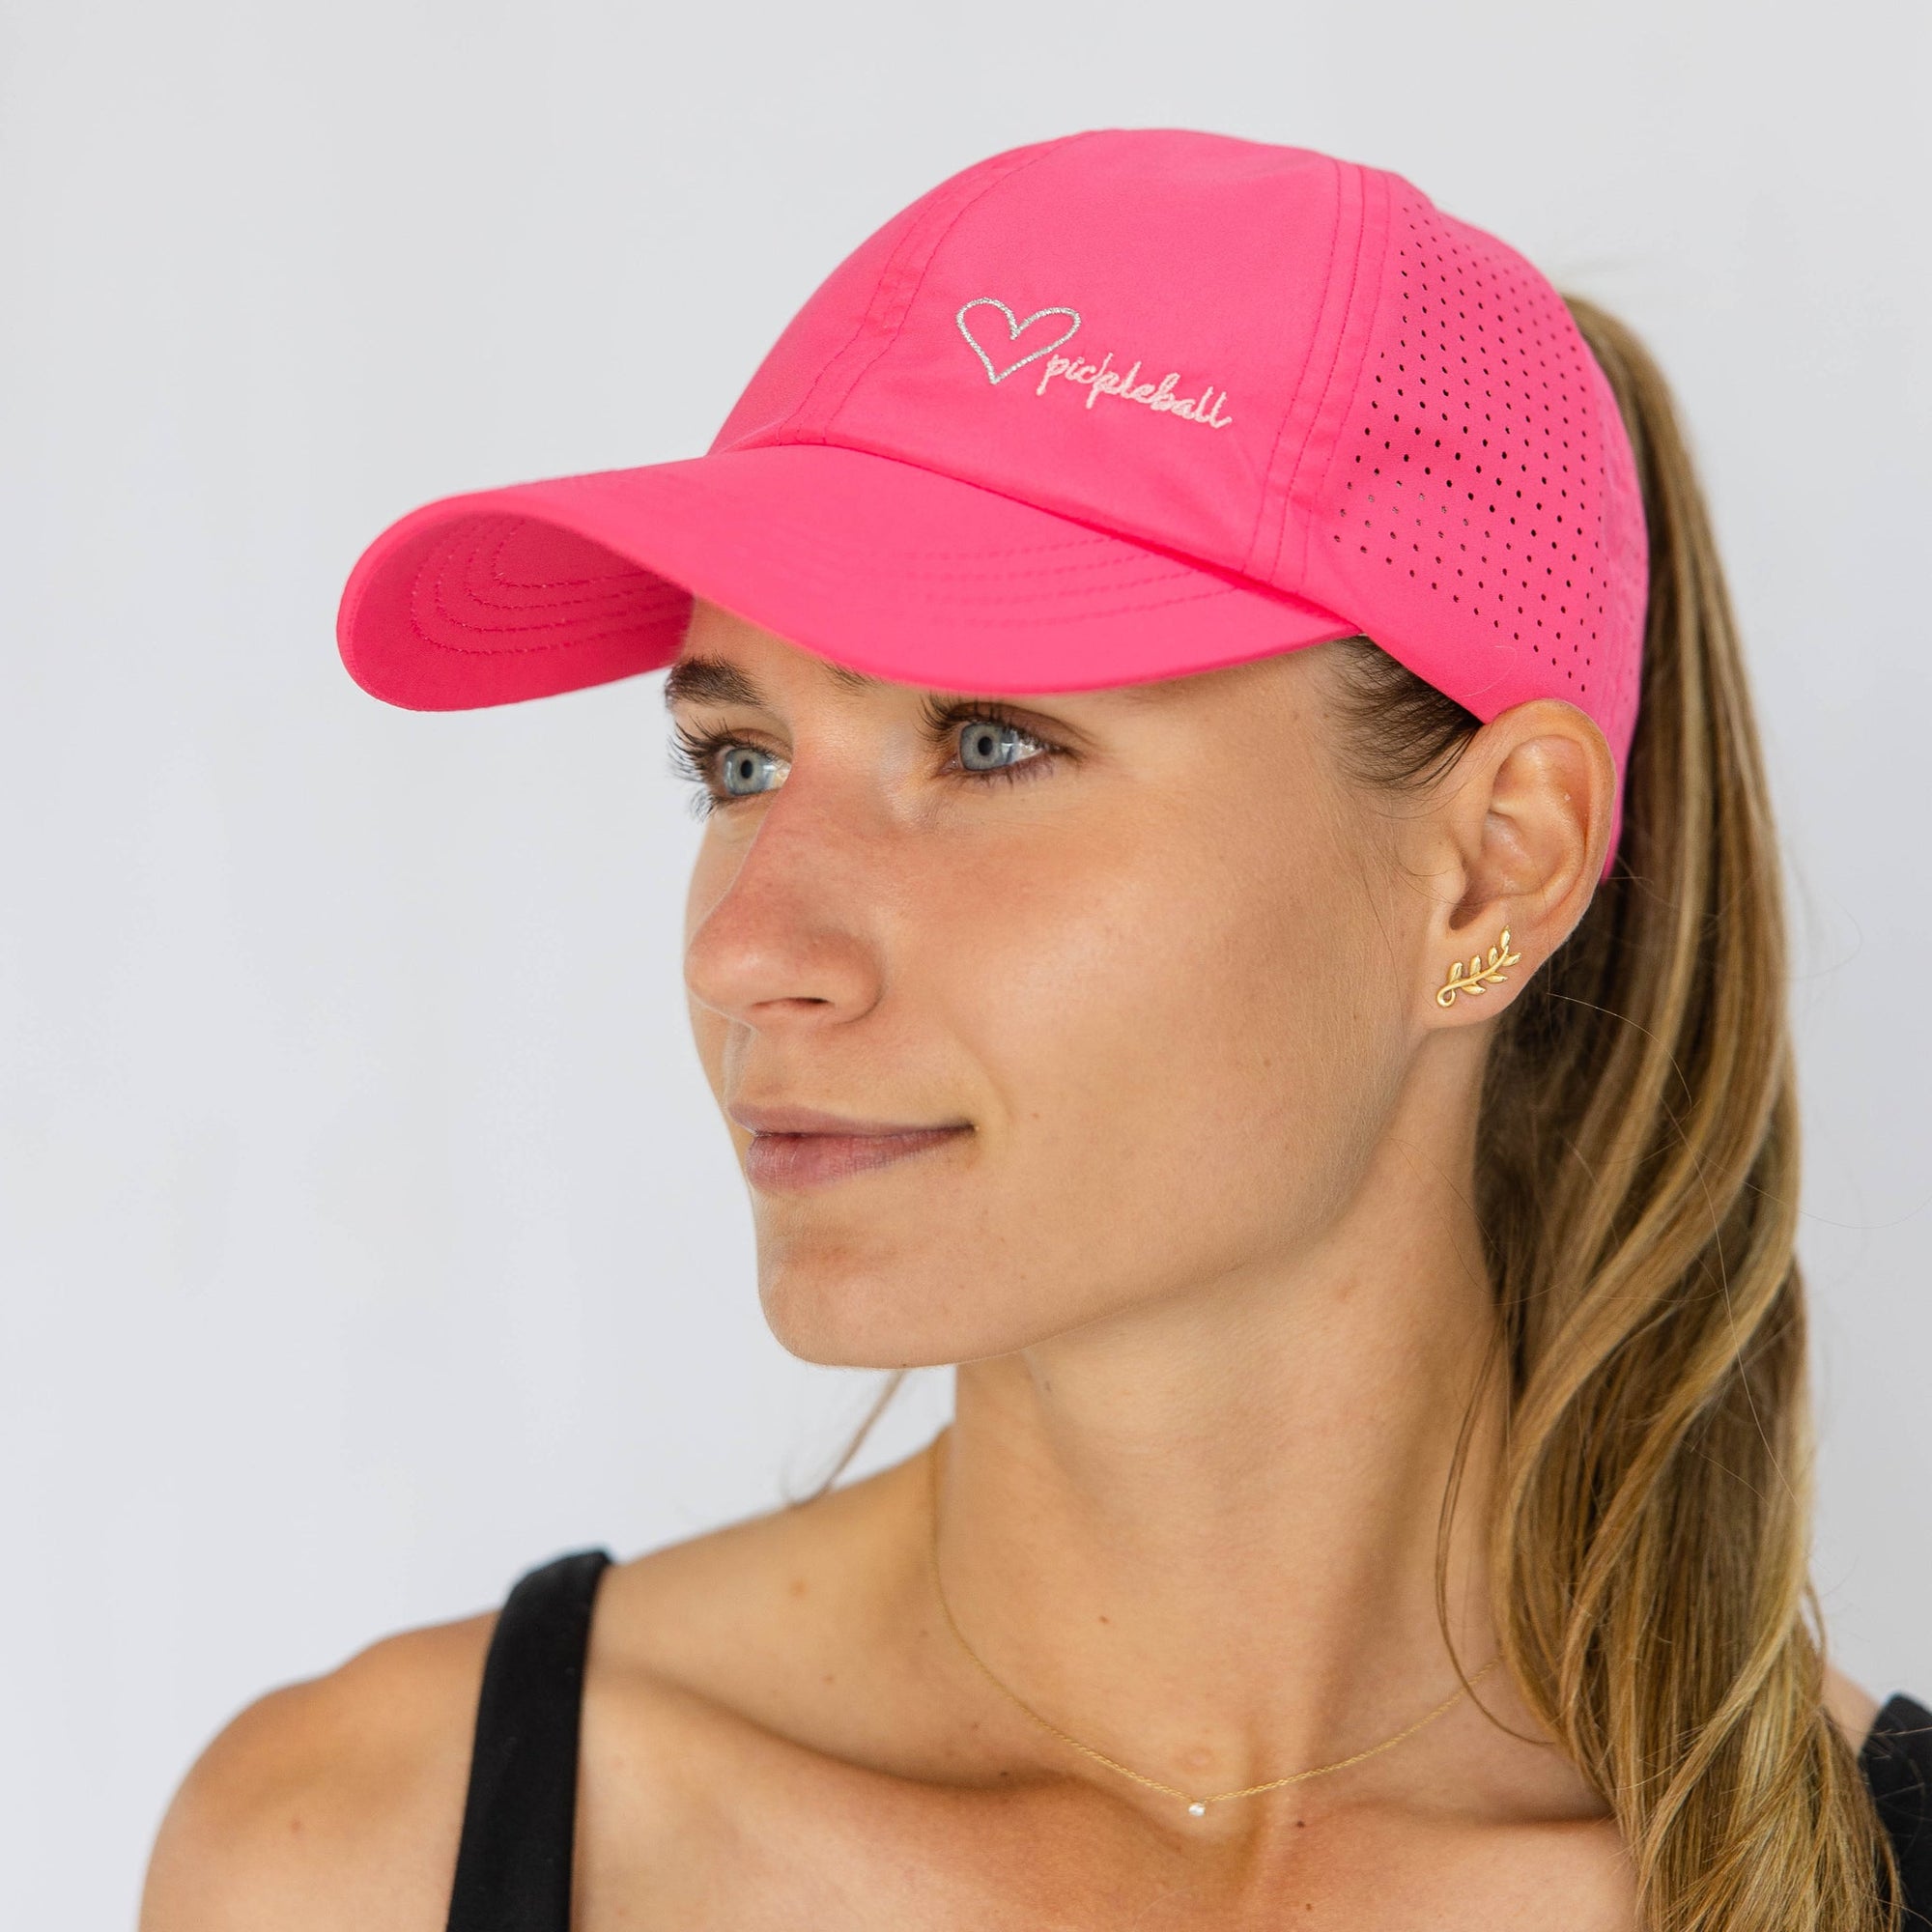 HEART PICKLEBALL TUCK-IN STRAP HAT- HOT PINK - Molly's! A Chic and Unique Boutique 